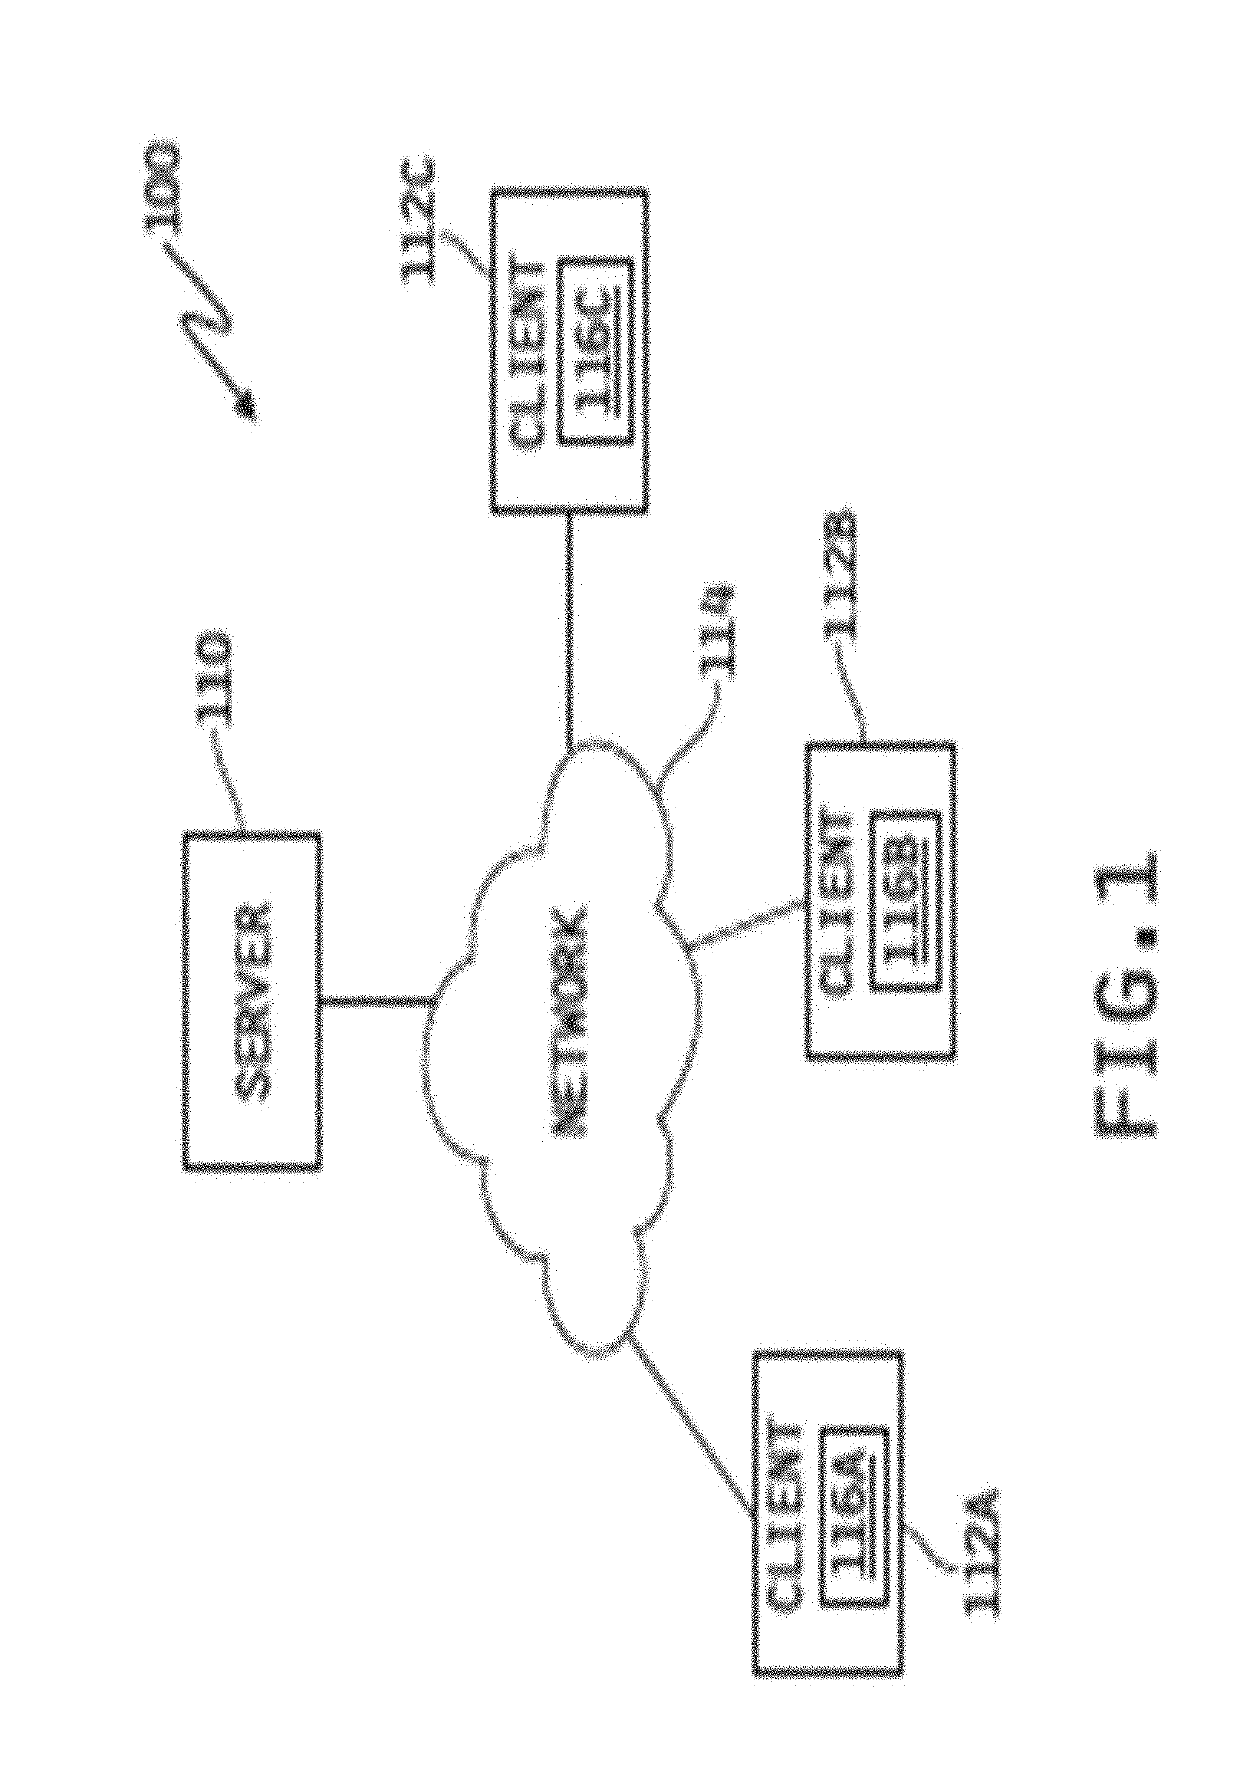 Object oriented system and method having semantic substructures for machine learning